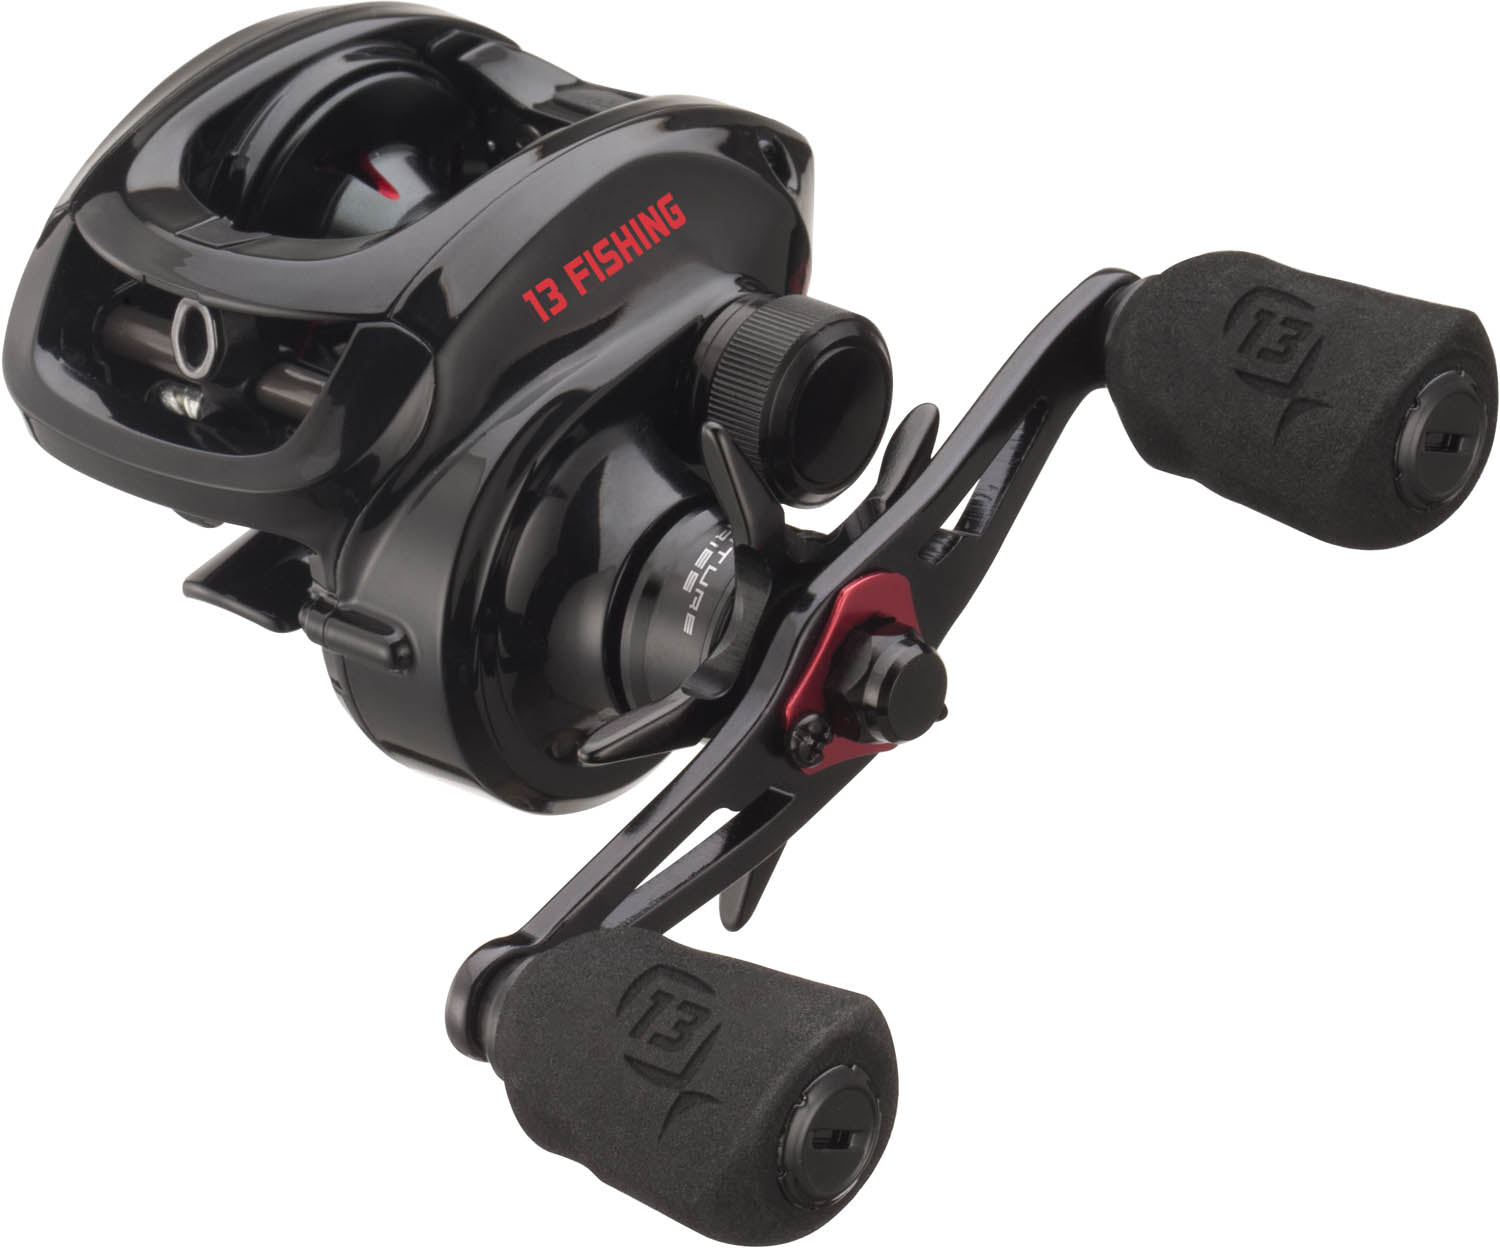 13 Fishing Inception SZ reel review